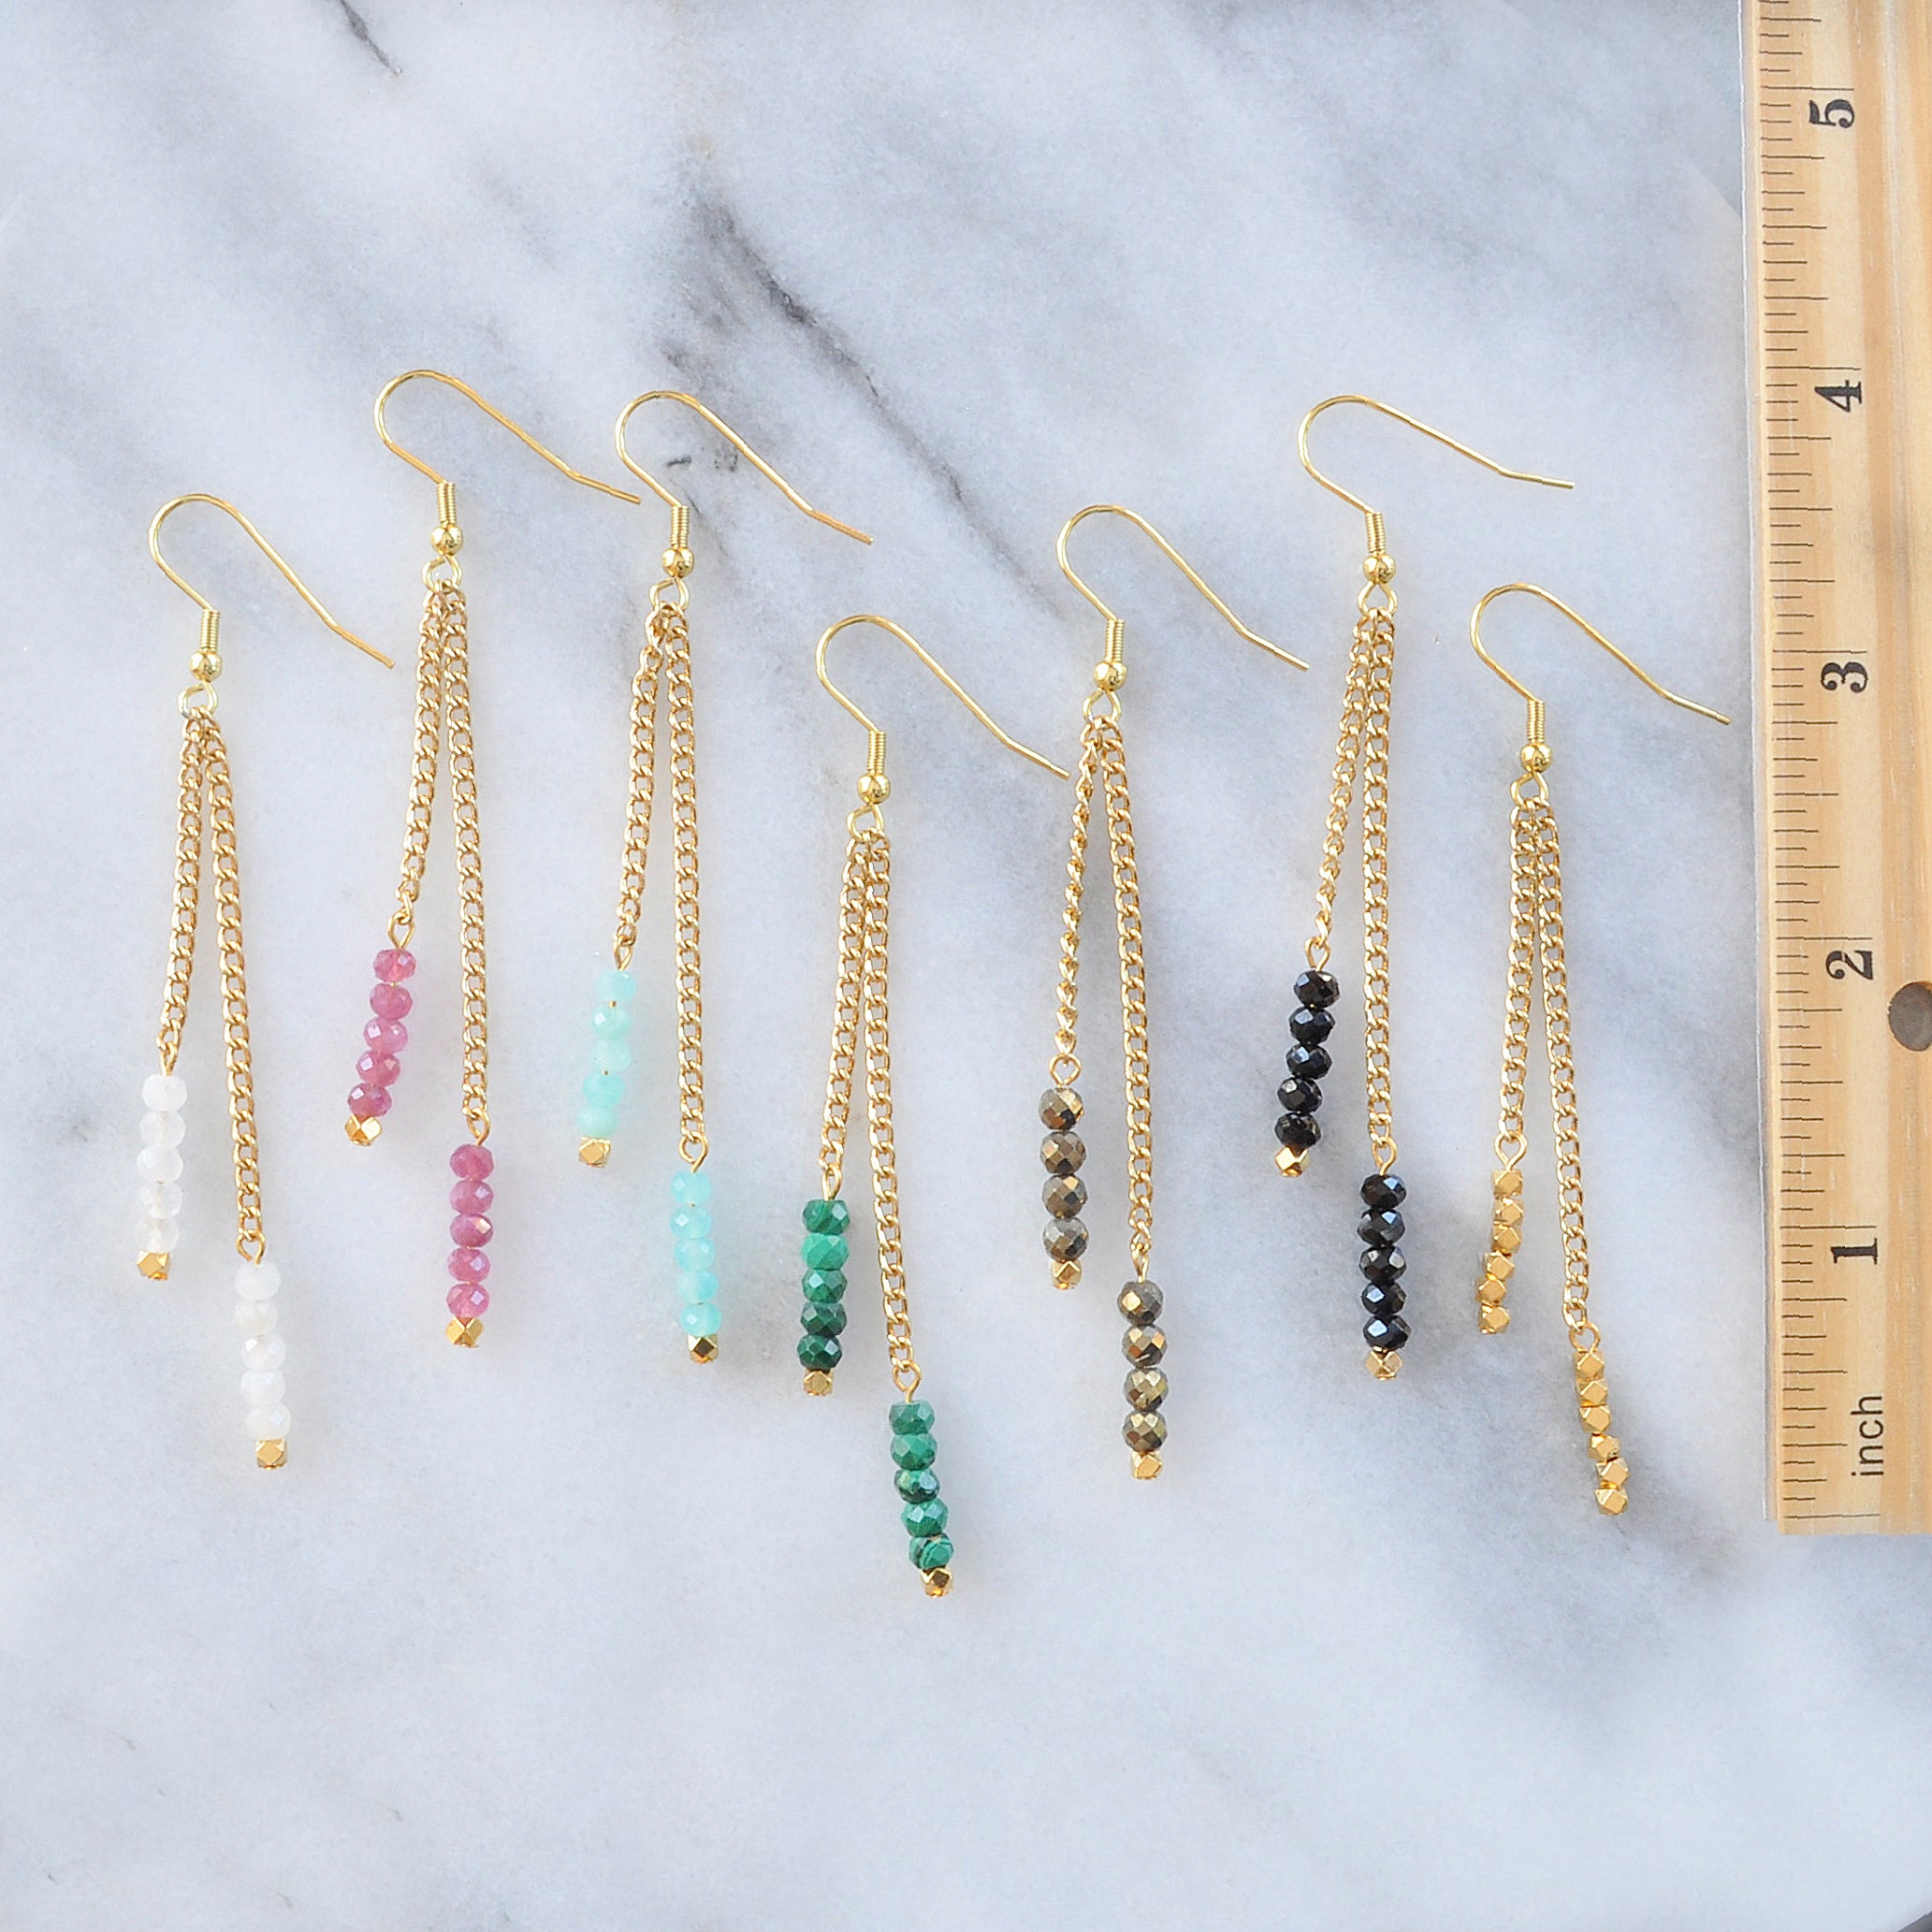 Libby & Smee Gemstone Gold chain Earrings available with Moonstone, Pink Tourmaline, Amazonite, Malachite, Pyrite, Black Spinel and Gold Beads measure 3.5 inches long